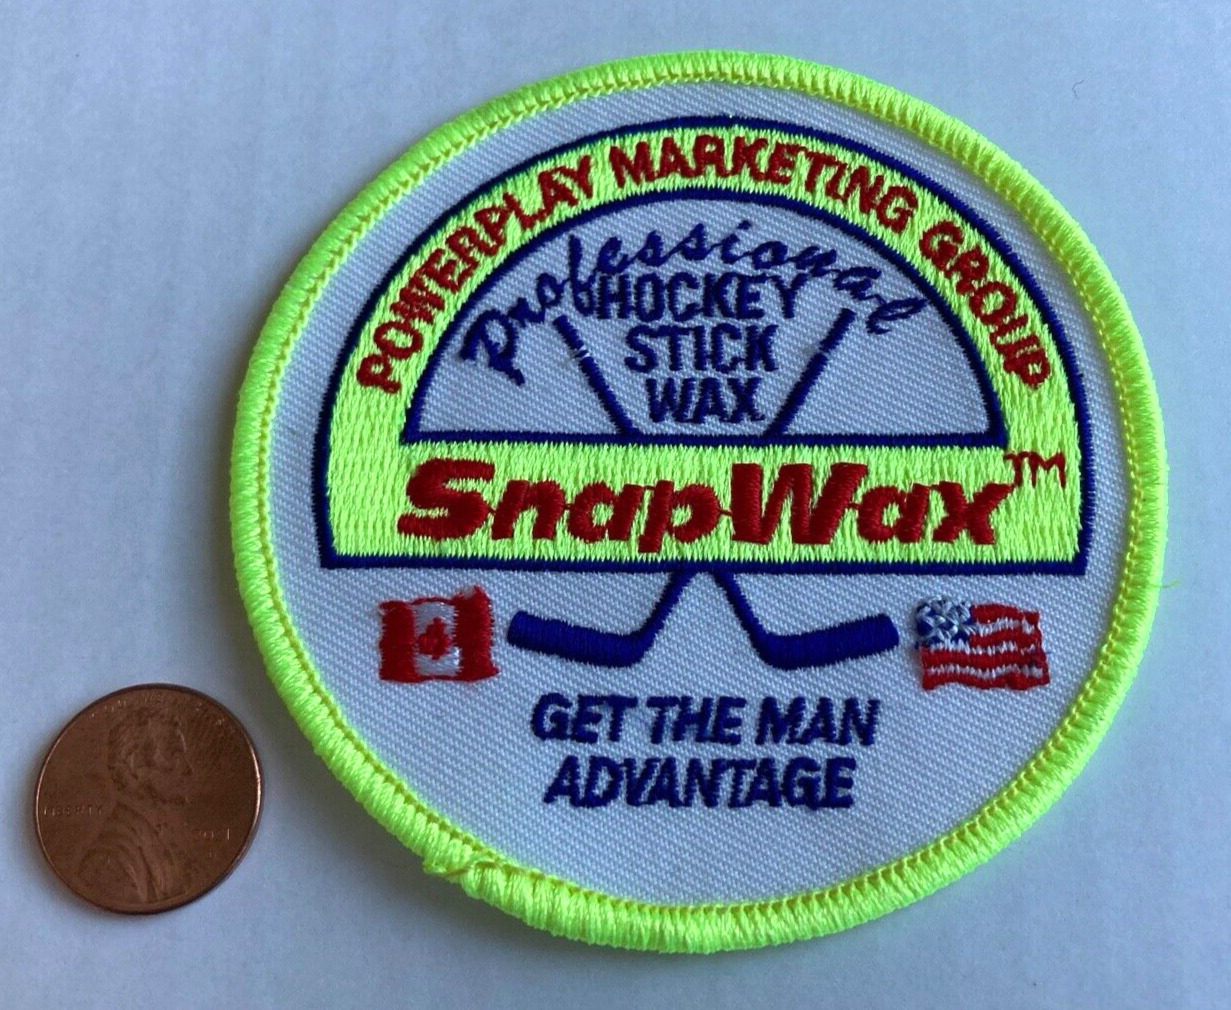 Late 1990's Early 2000's Vintage Snap Wax Hockey Stick Wax Patch Unused Rare Sew